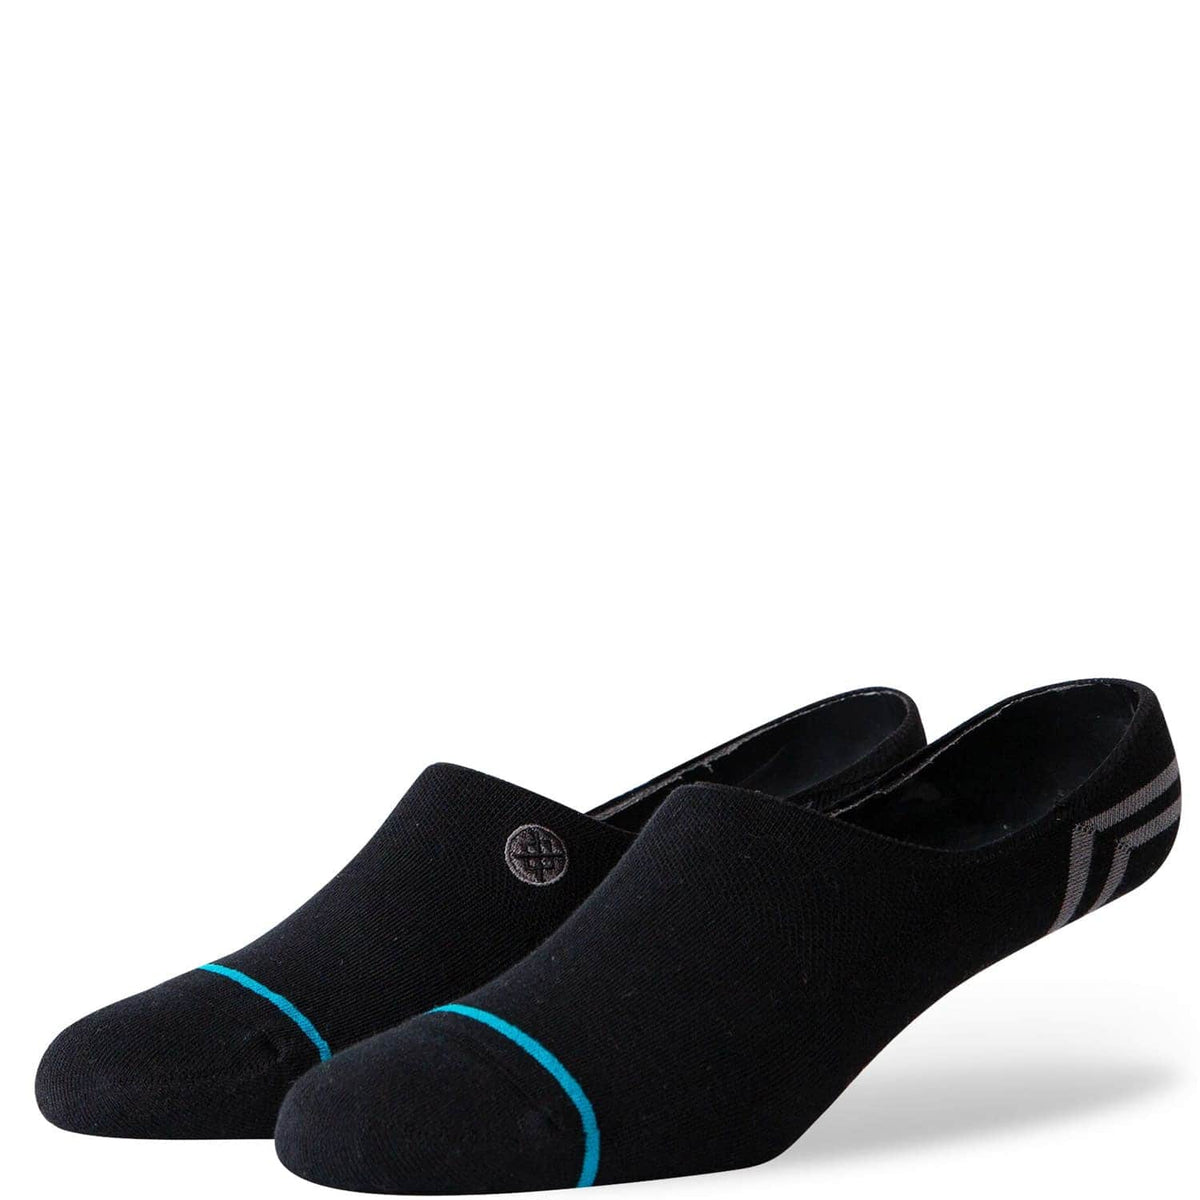 Stance Gamut 2 (3-Pack) Invisible Socks - Black - Mens Invisible/No Show Socks by Stance